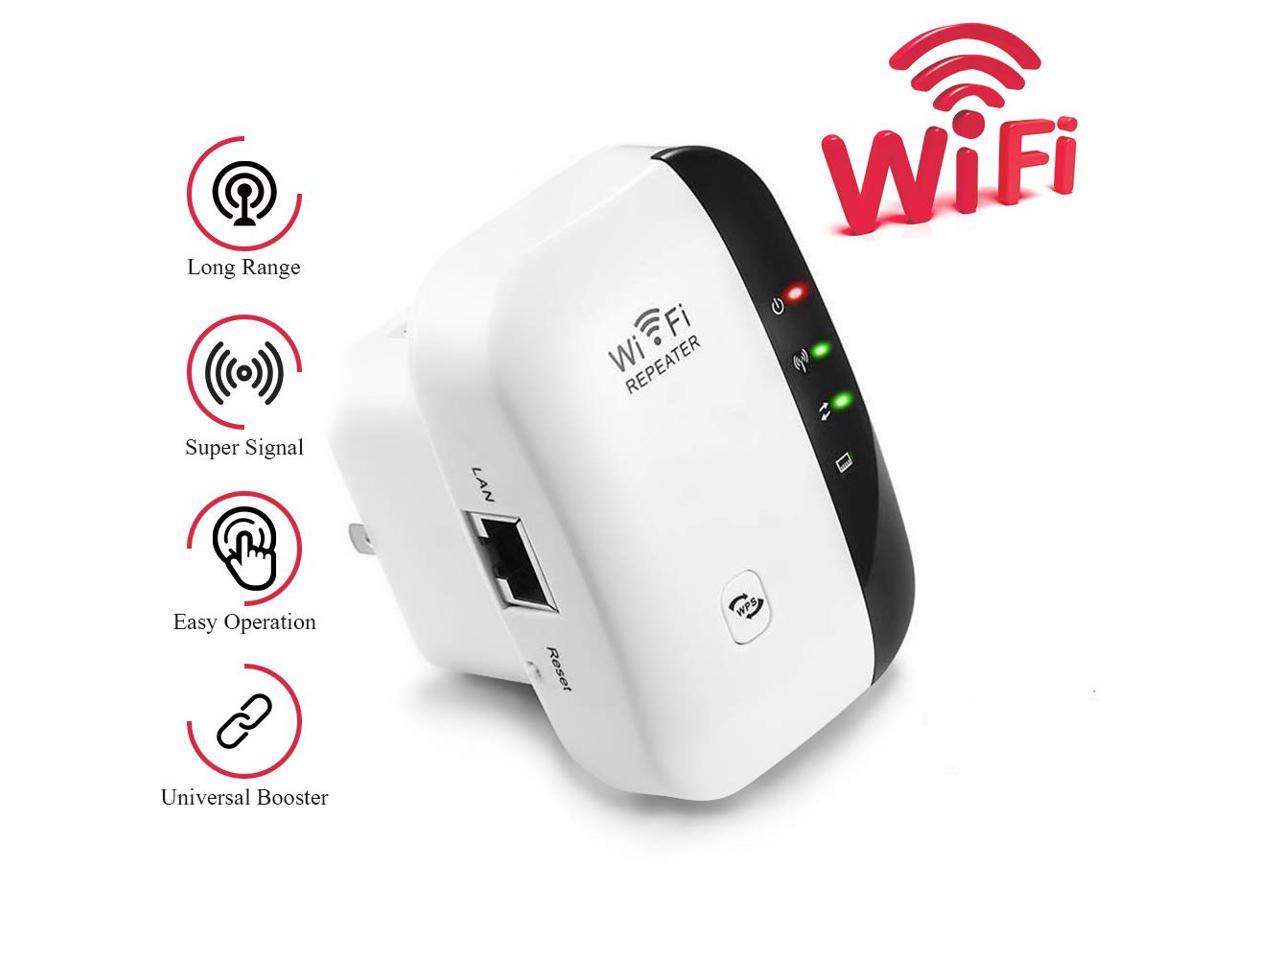 WiFi Range Extender 300Mbps Wireless Repeater Internet Signal Booster 2.4GHz Amplifier for High Speed Long Range Easily Set Up Supports Repeater/Access Point Mode Extends WiFi to Home & Alexa Devices 